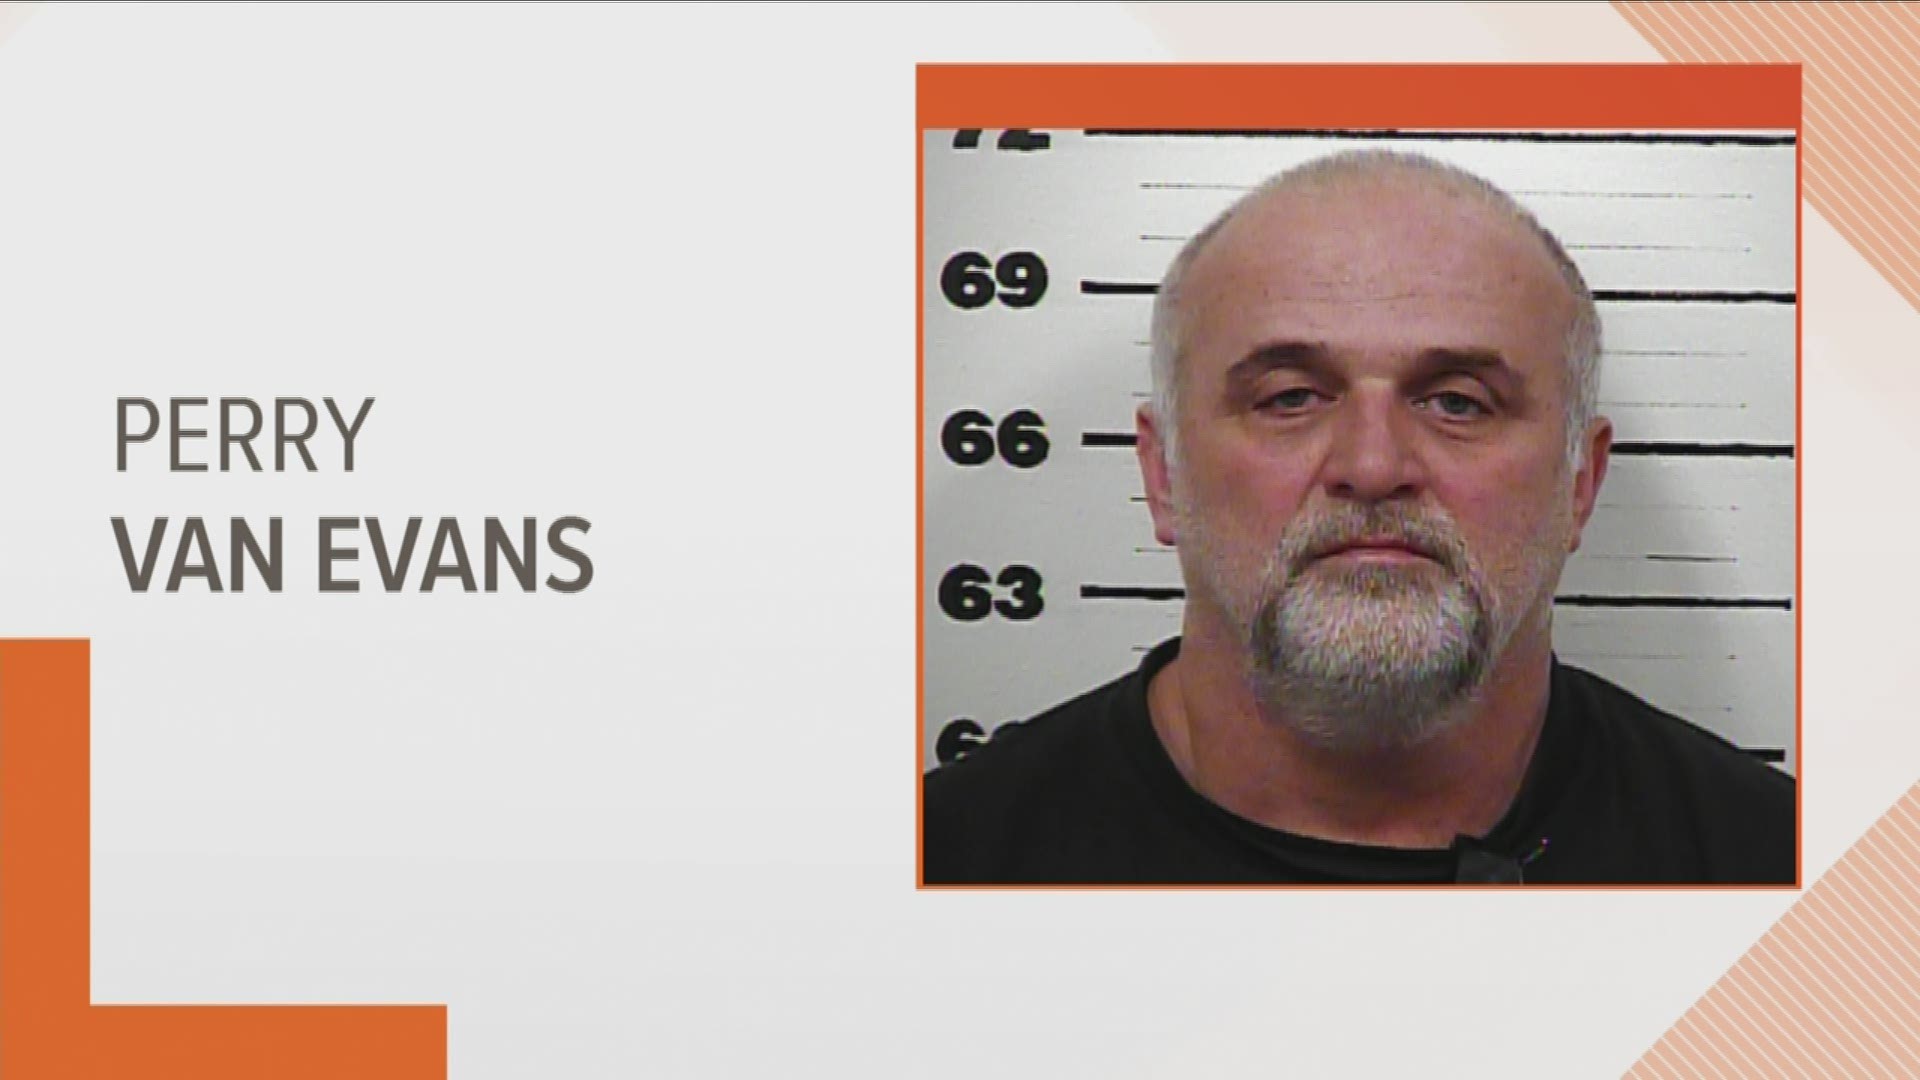 The sheriff's office said Perry Van Evans was arrested Wednesday following a grand jury indictment.